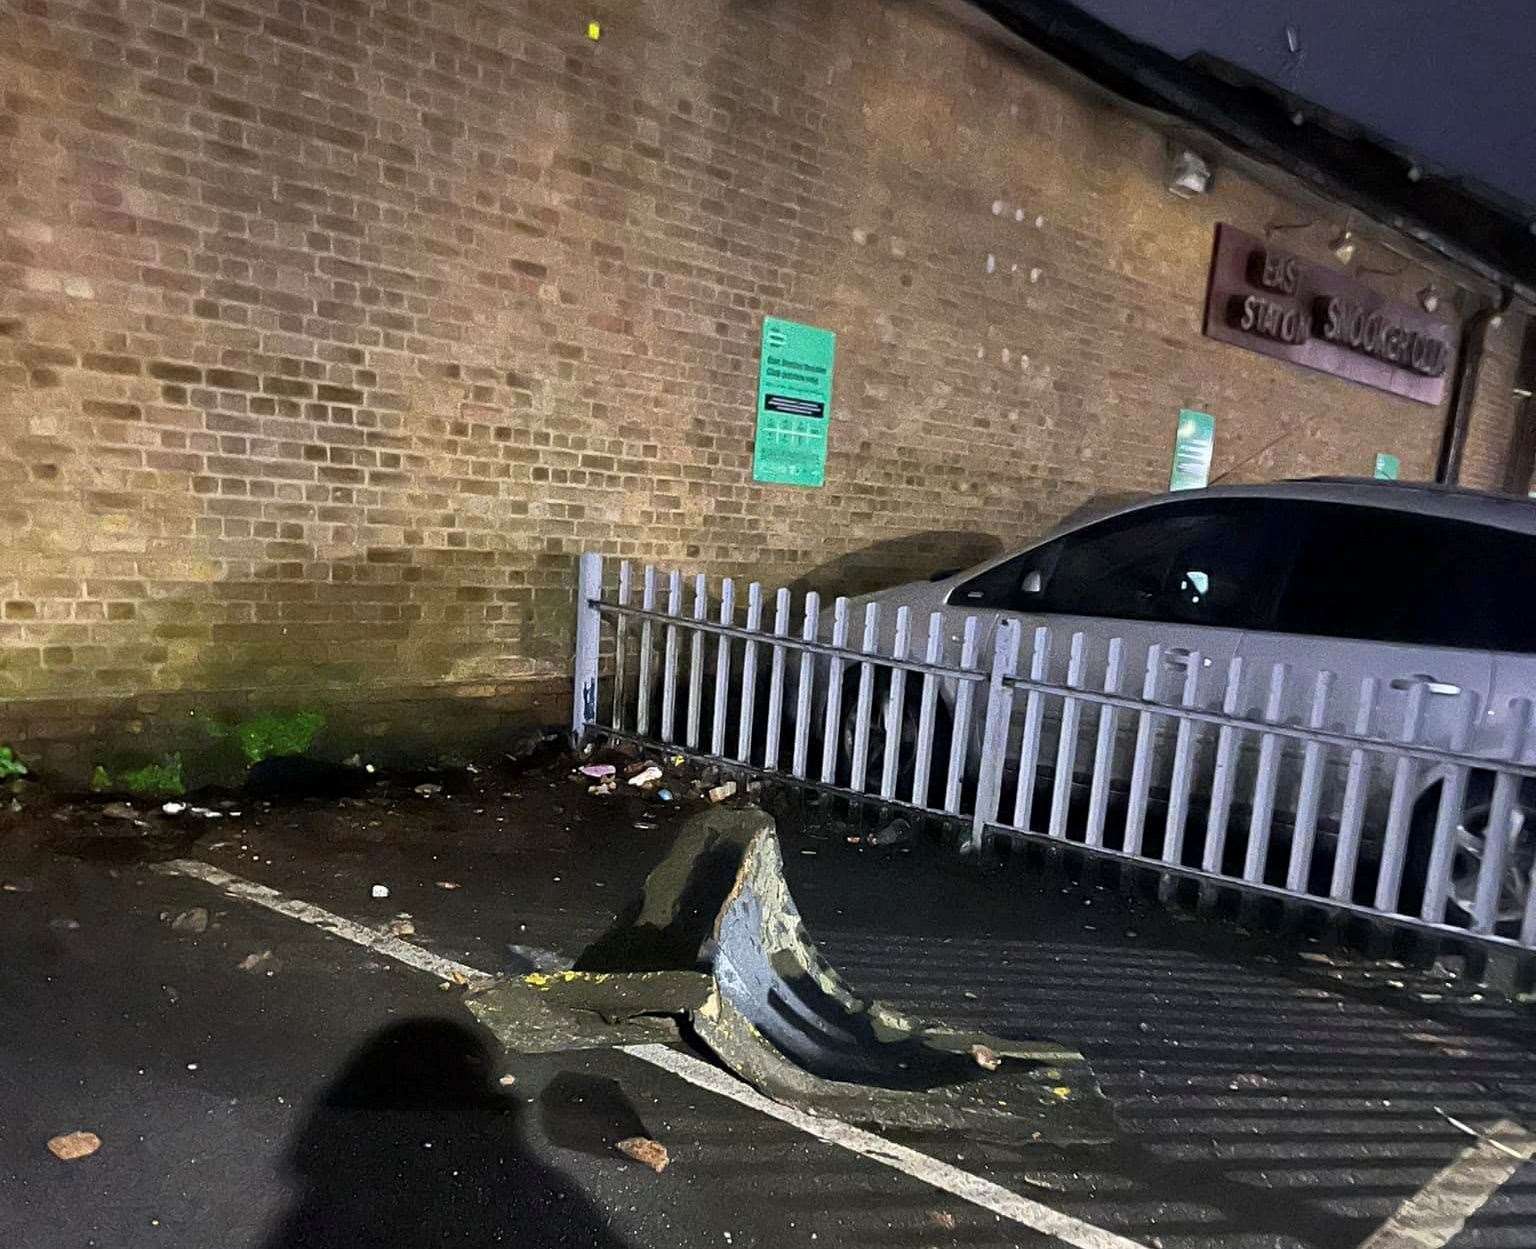 University student Charley Jerold says she was almost hit by a piece of roof that fell from the East Station Snooker Club building. Picture: Charley Jerold